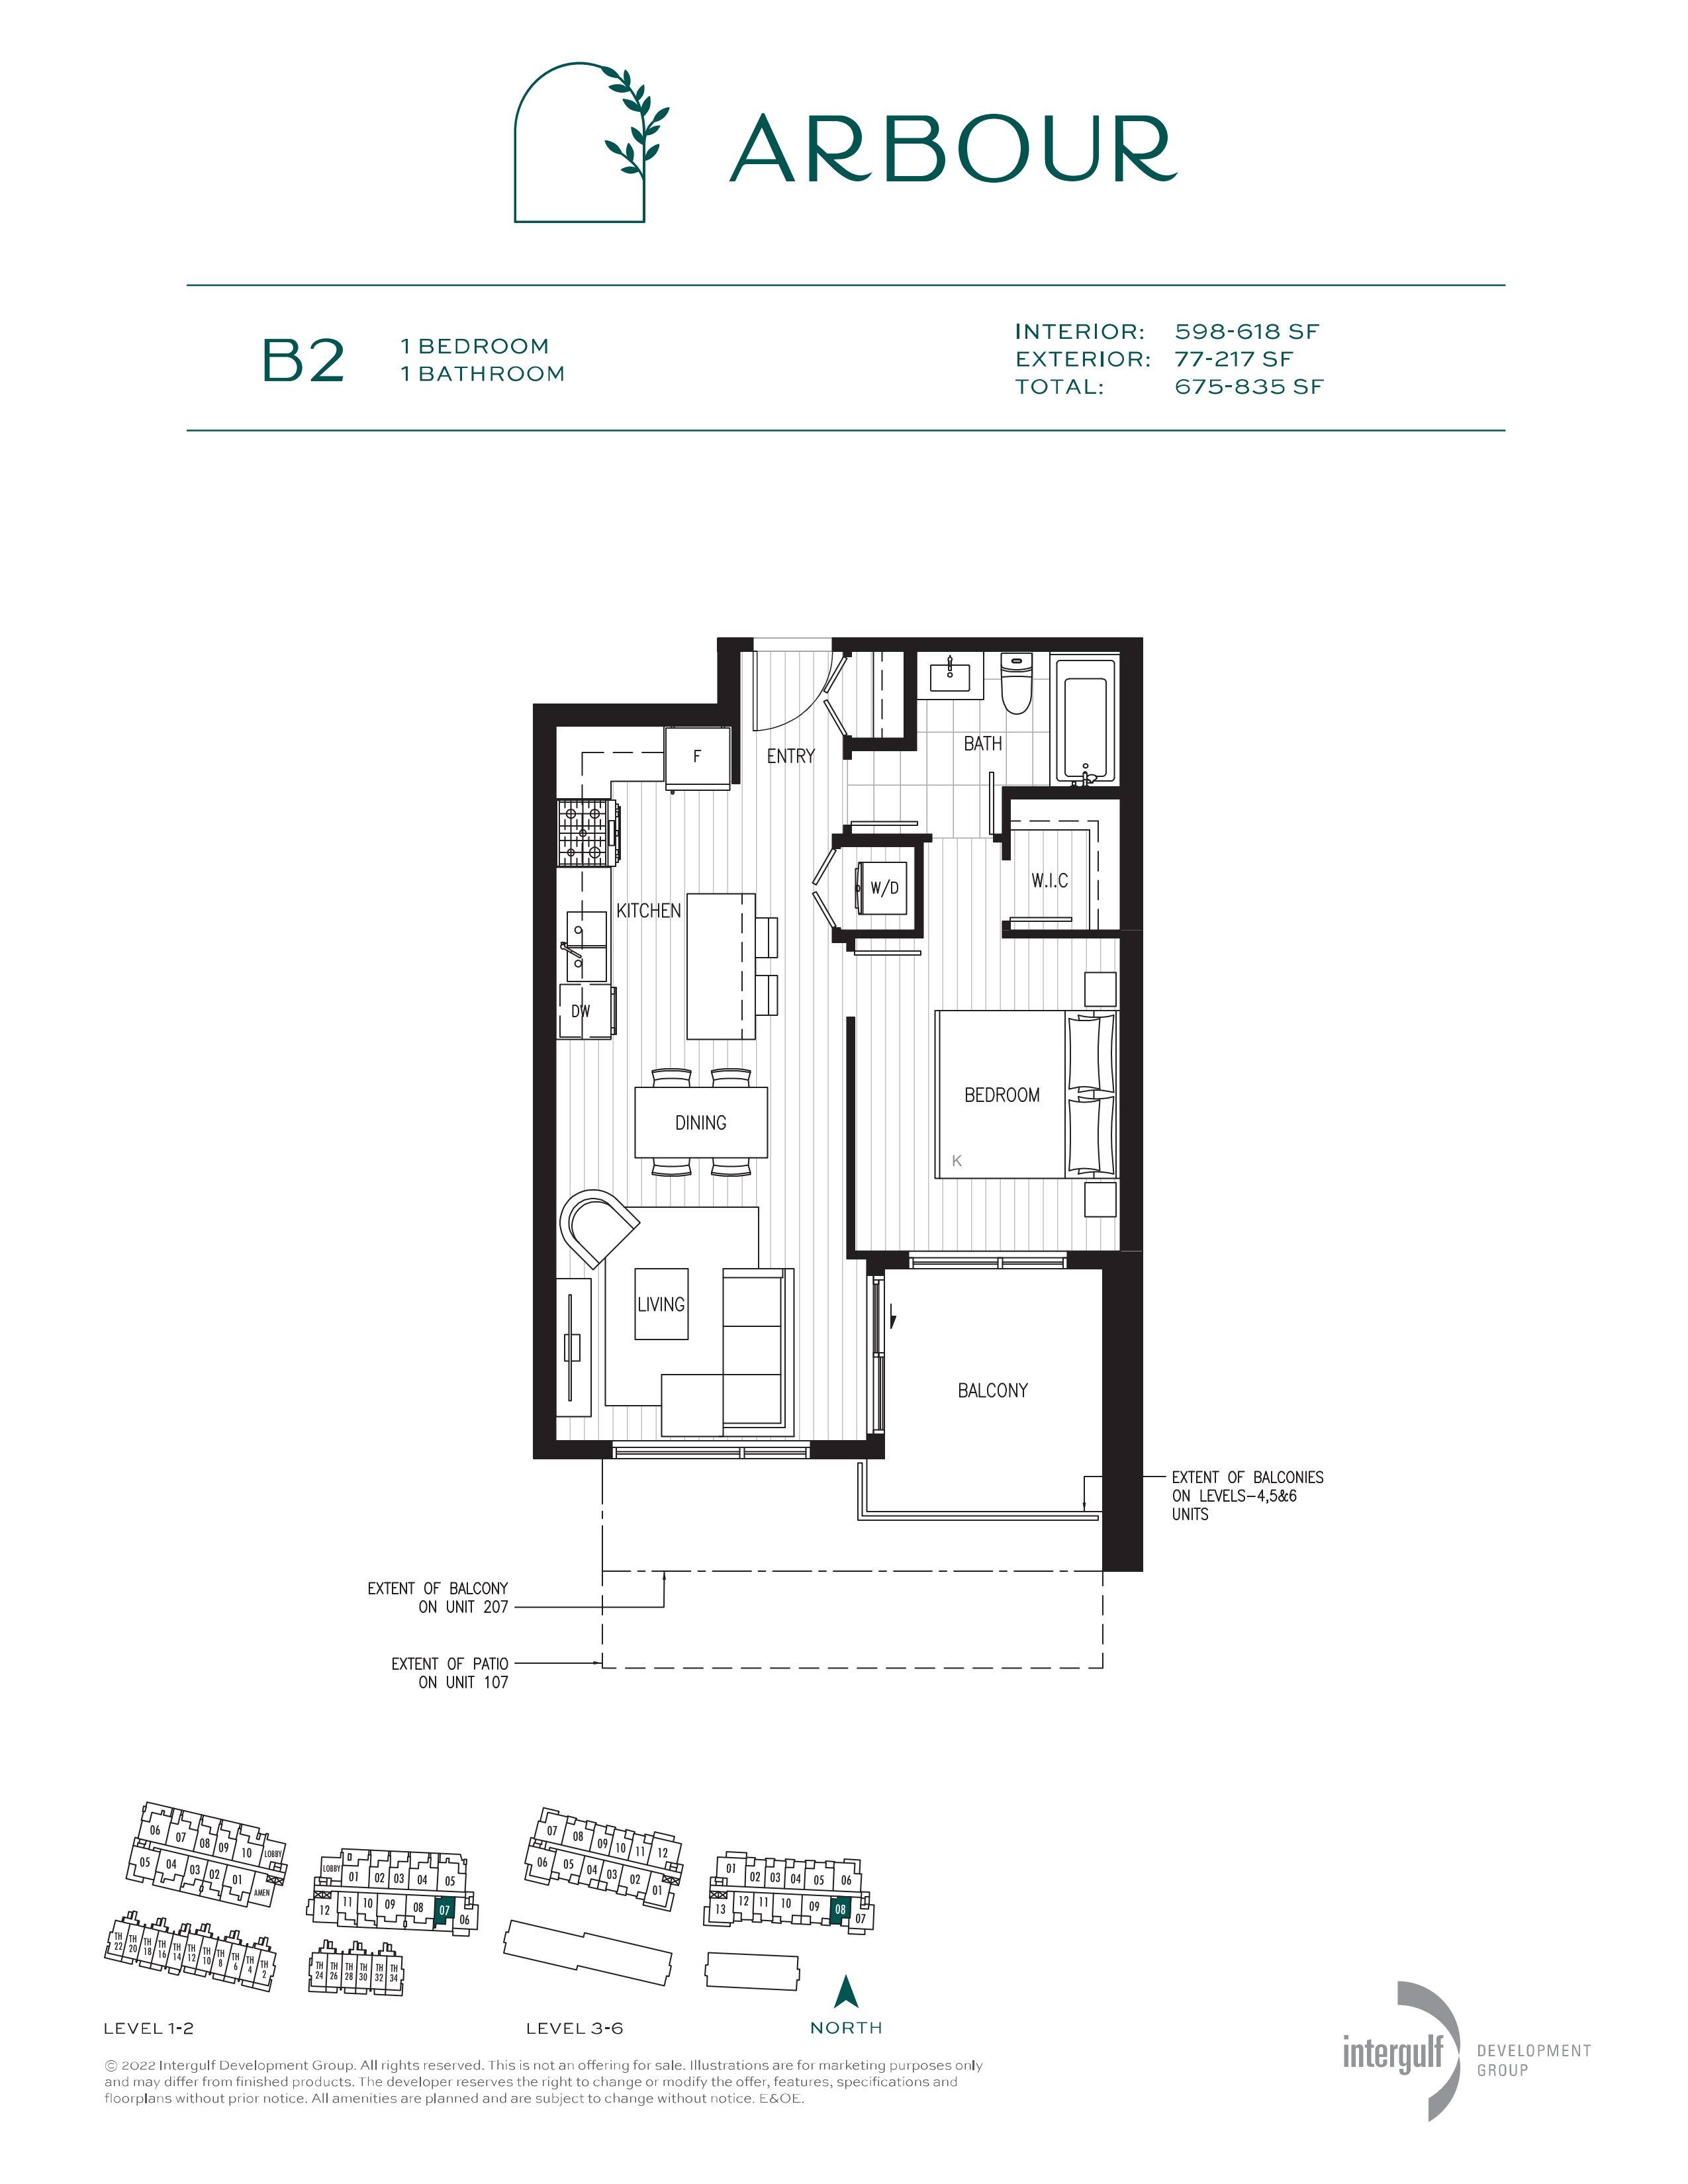 B2 Floor Plan of Arbour Condos with undefined beds